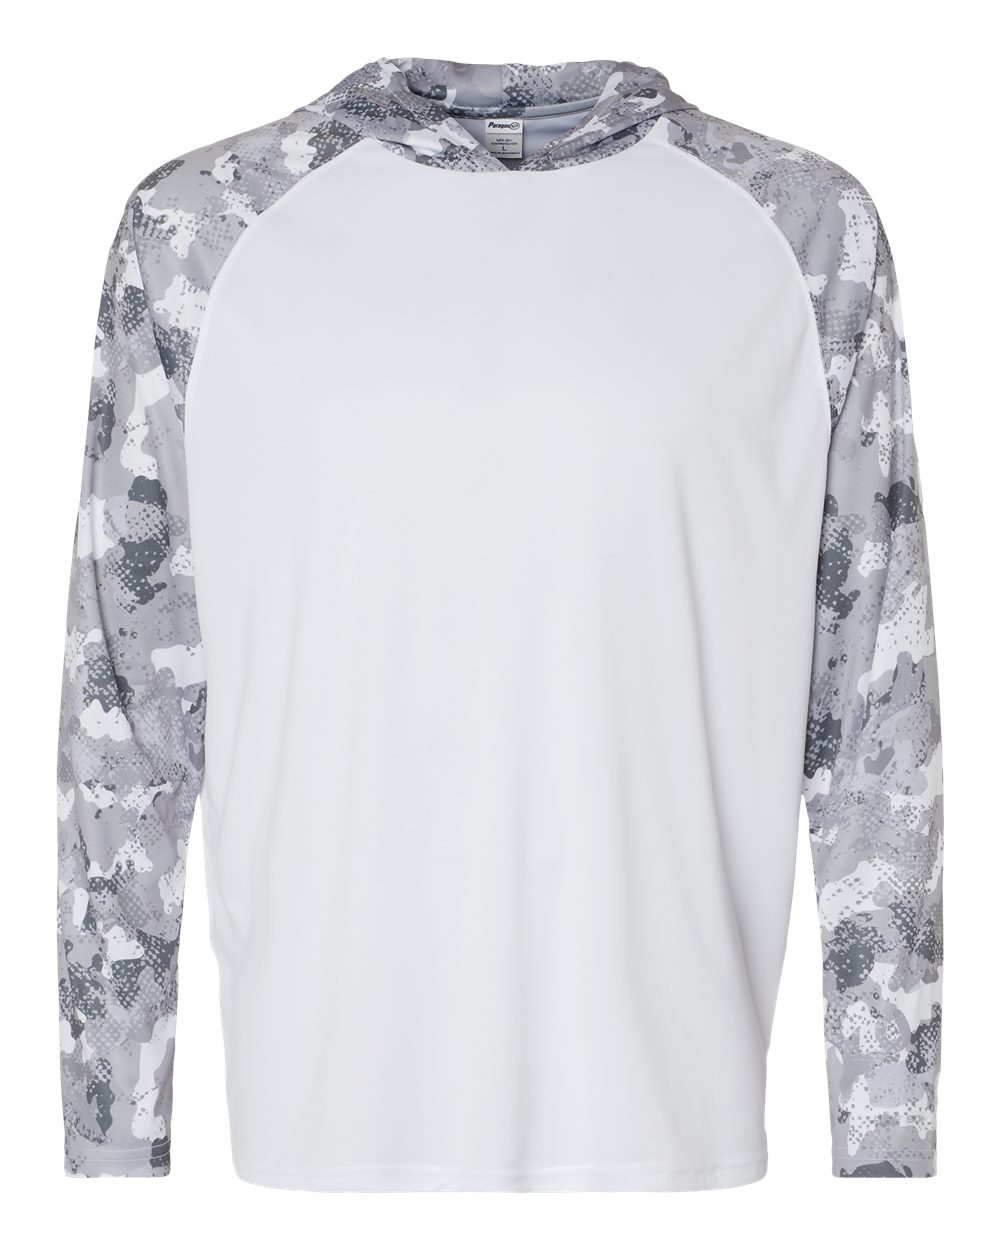 Paragon 240 - Tortuga Extreme Performance Hooded T-Shirt